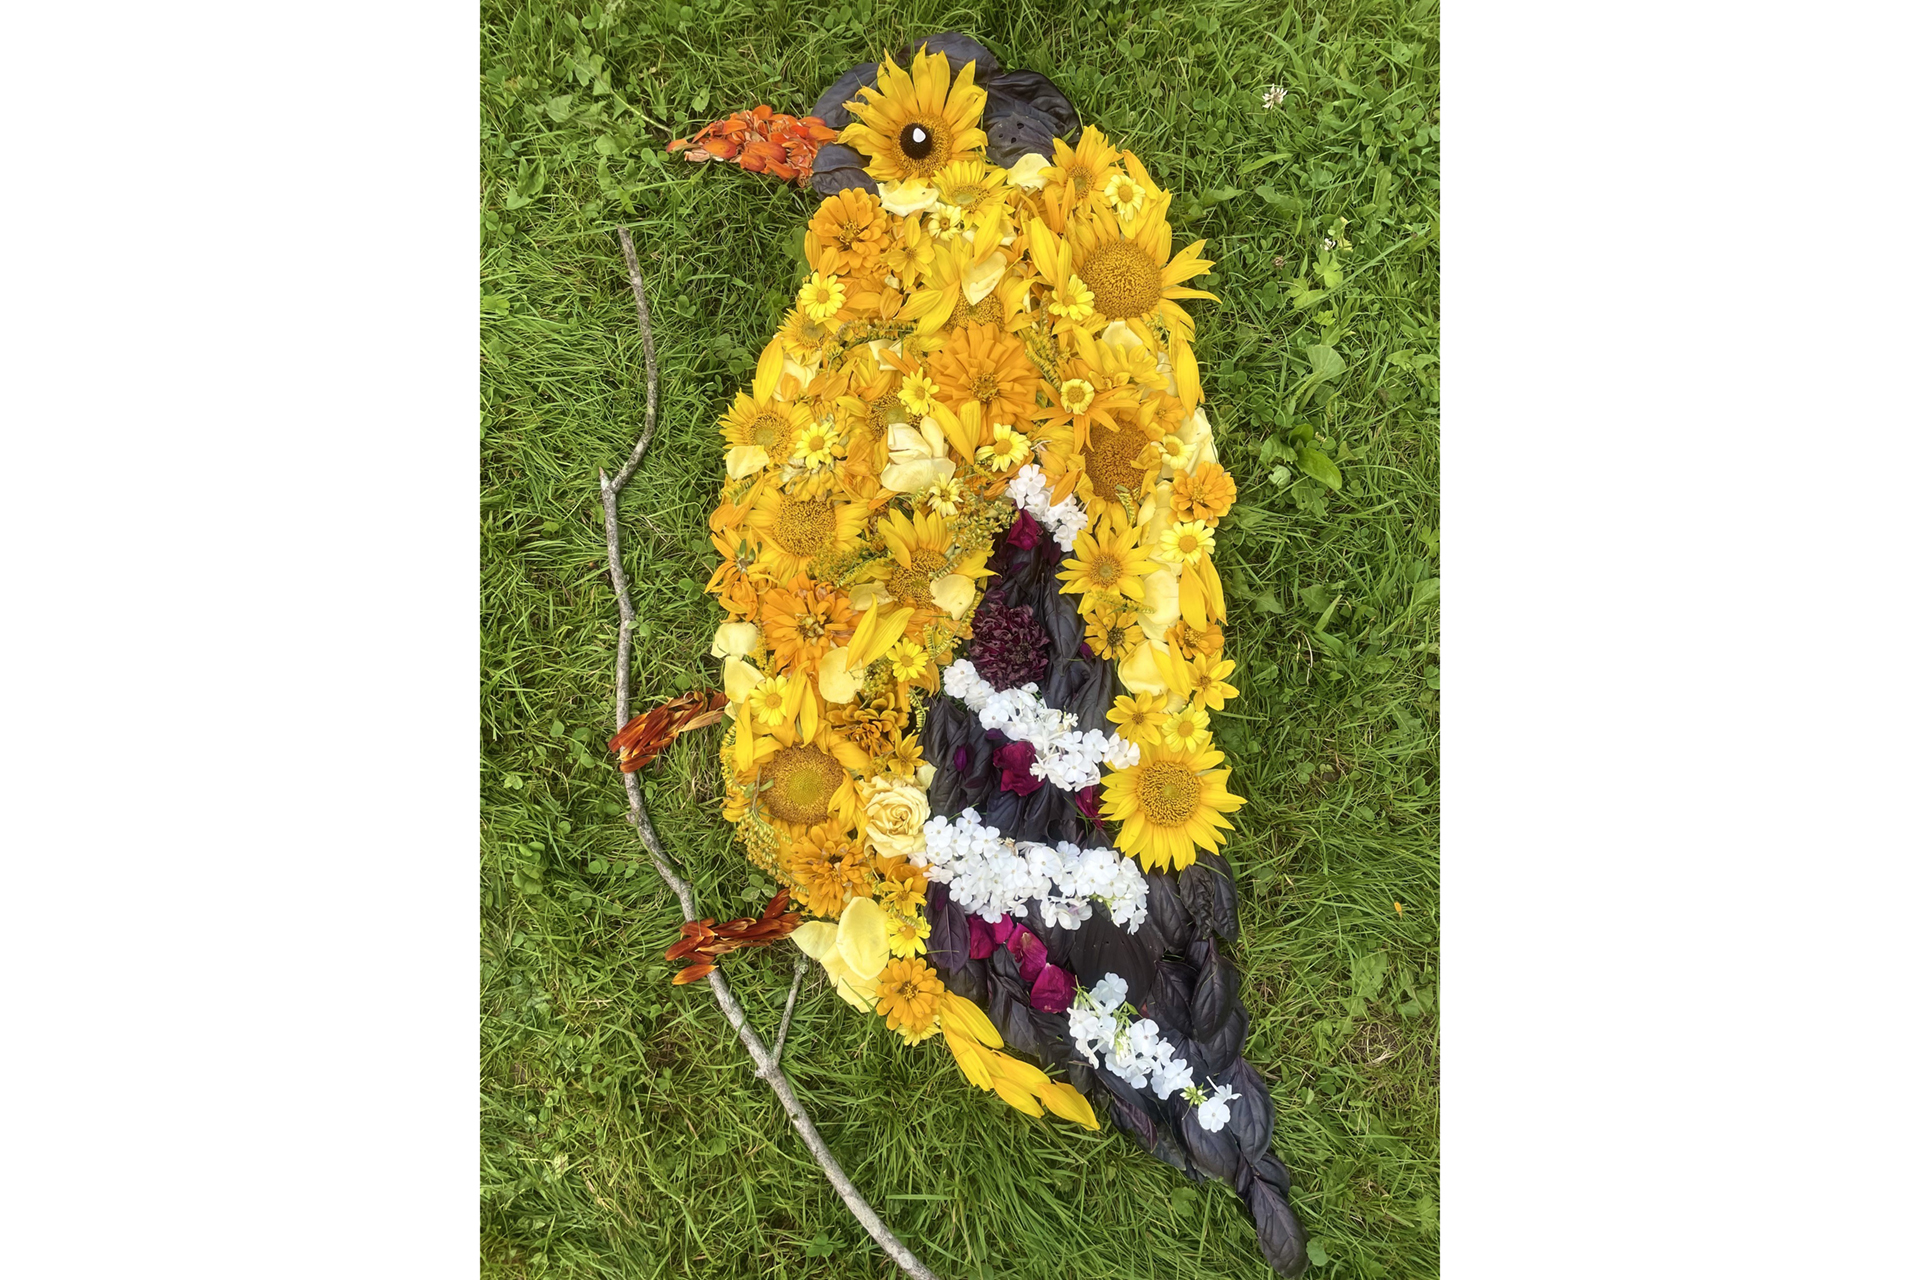 Flowers and leaves arranged into a representation of a goldfinch on a branch